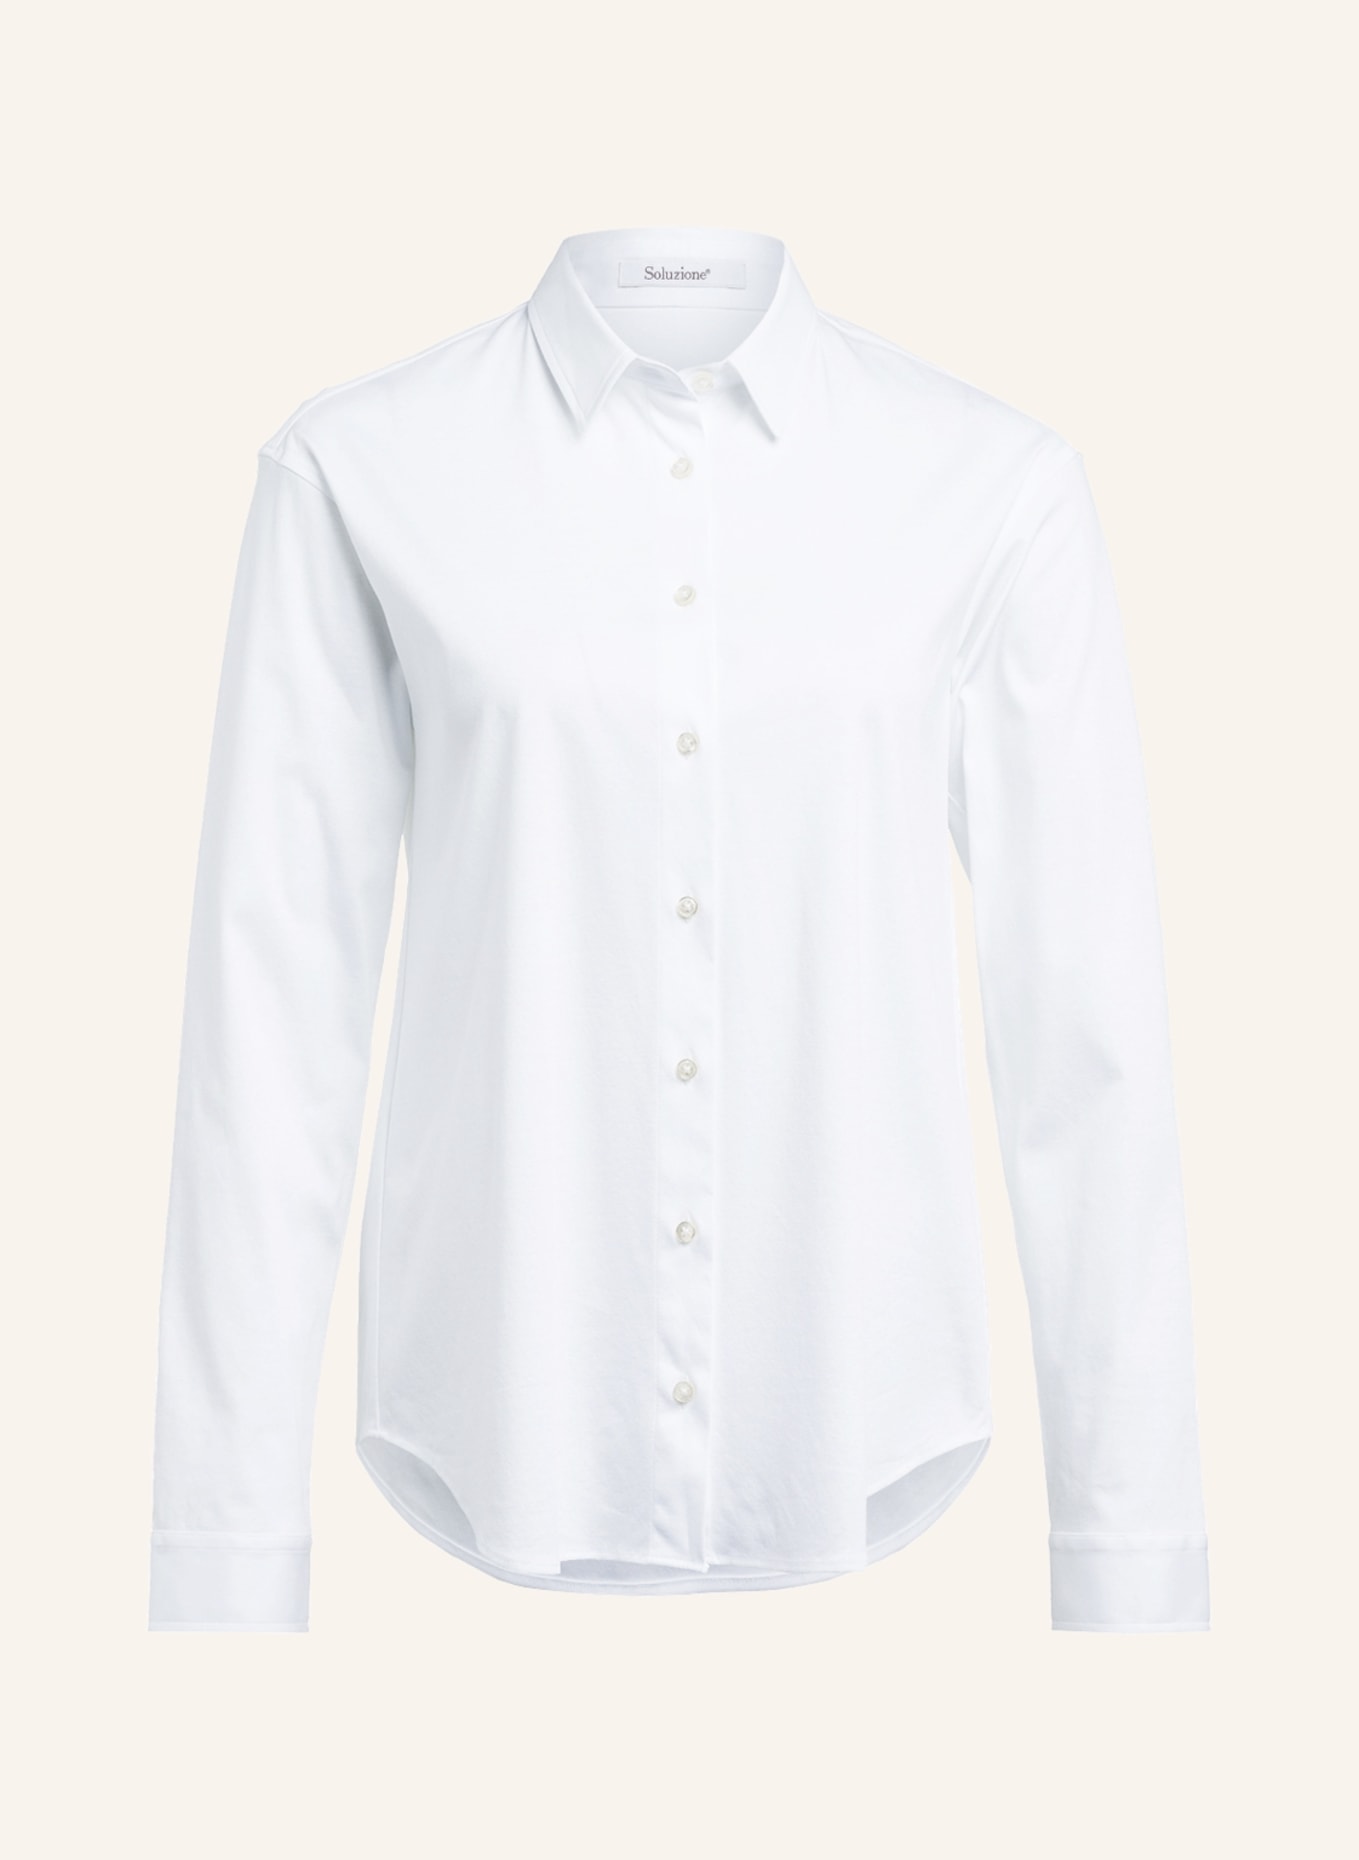 Soluzione Shirt blouse made of jersey, Color: WHITE (Image 1)